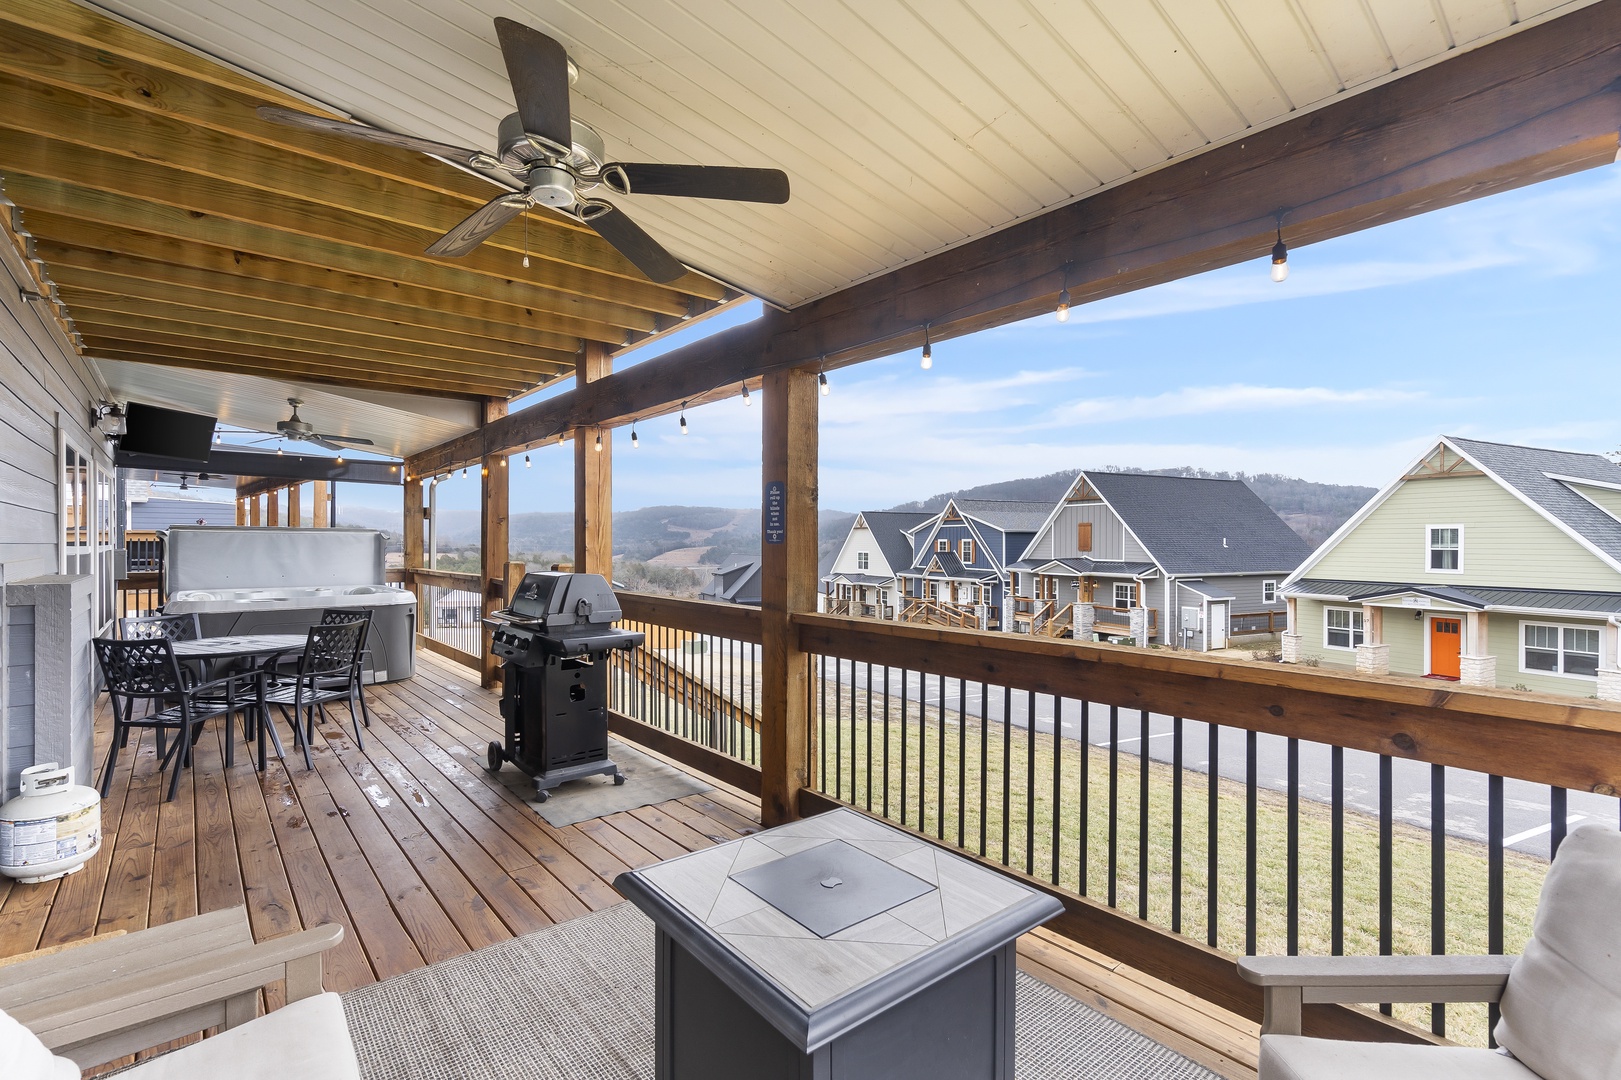 Escape to the deck for serene relaxation and scenic views